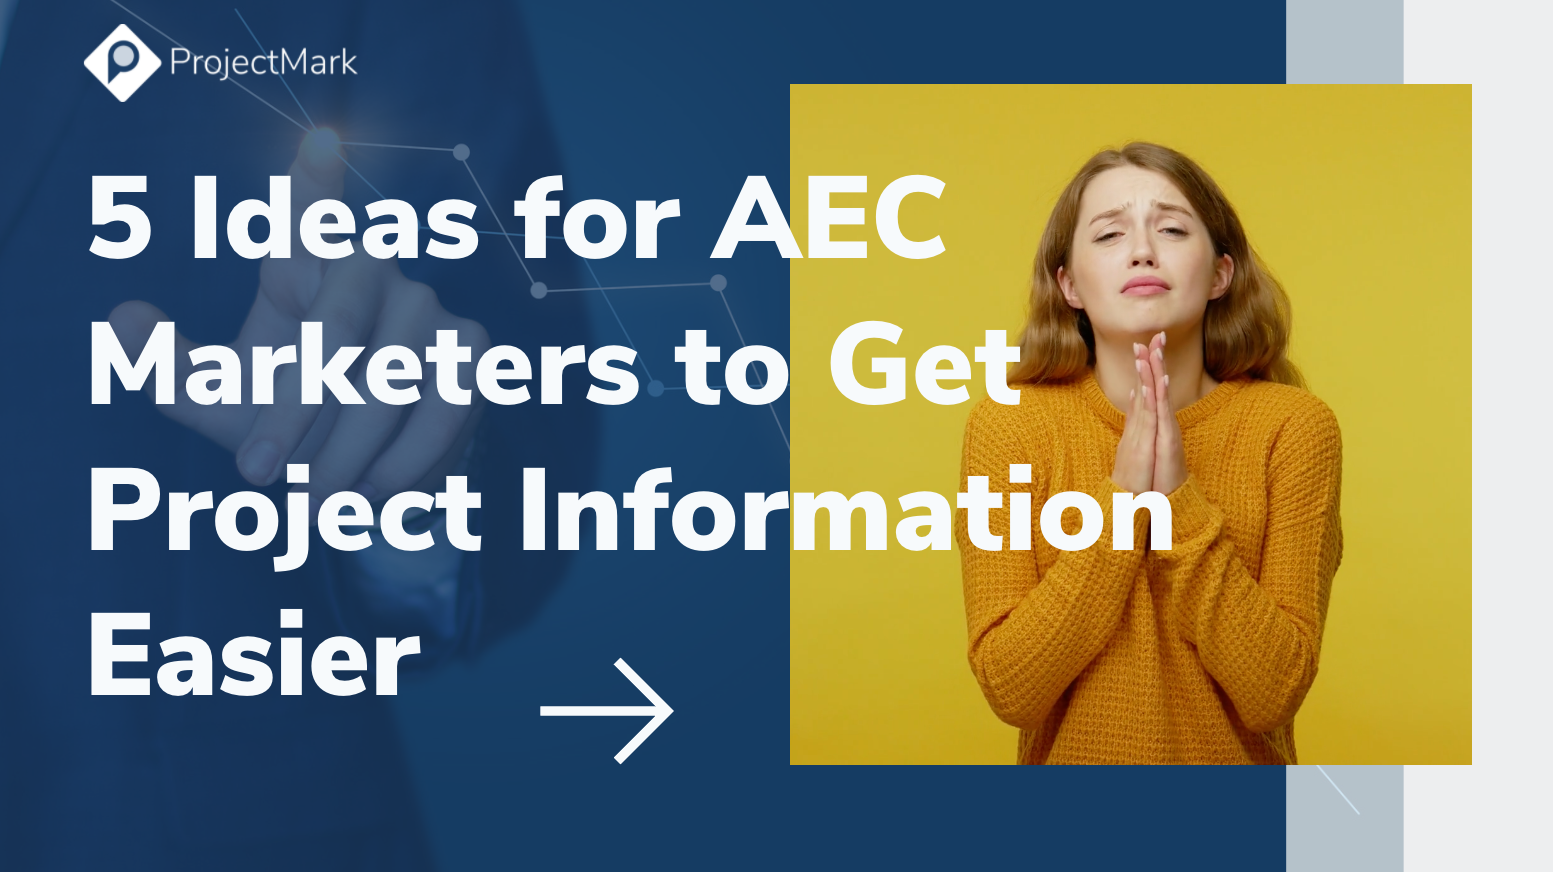 5 Ideas for AEC Marketers to Get Project Information Easier